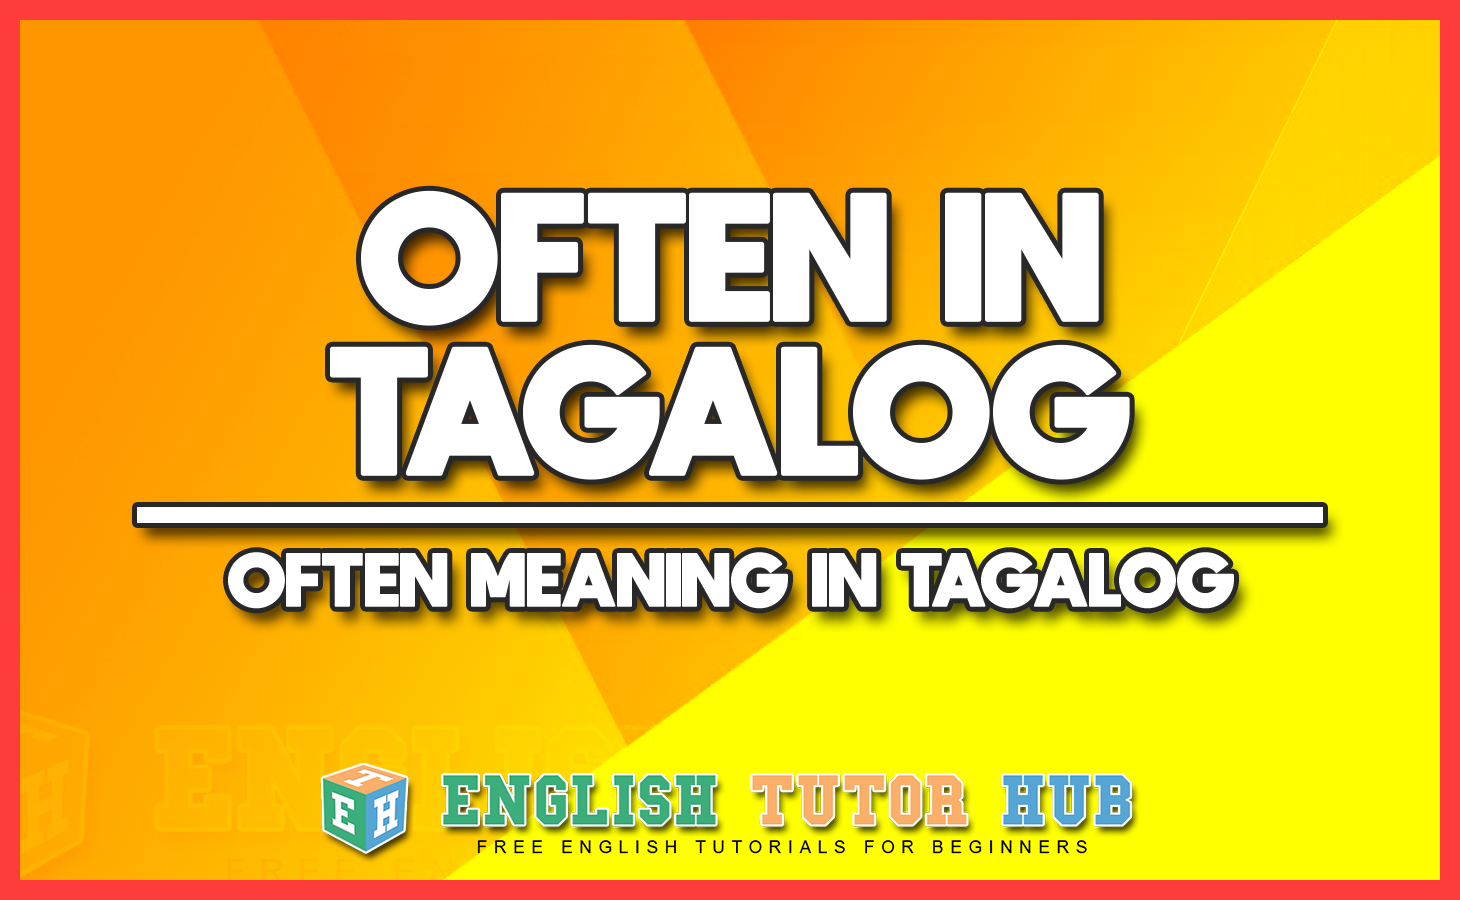 OFTEN IN TAGALOG - OFTEN MEANING IN TAGALOG